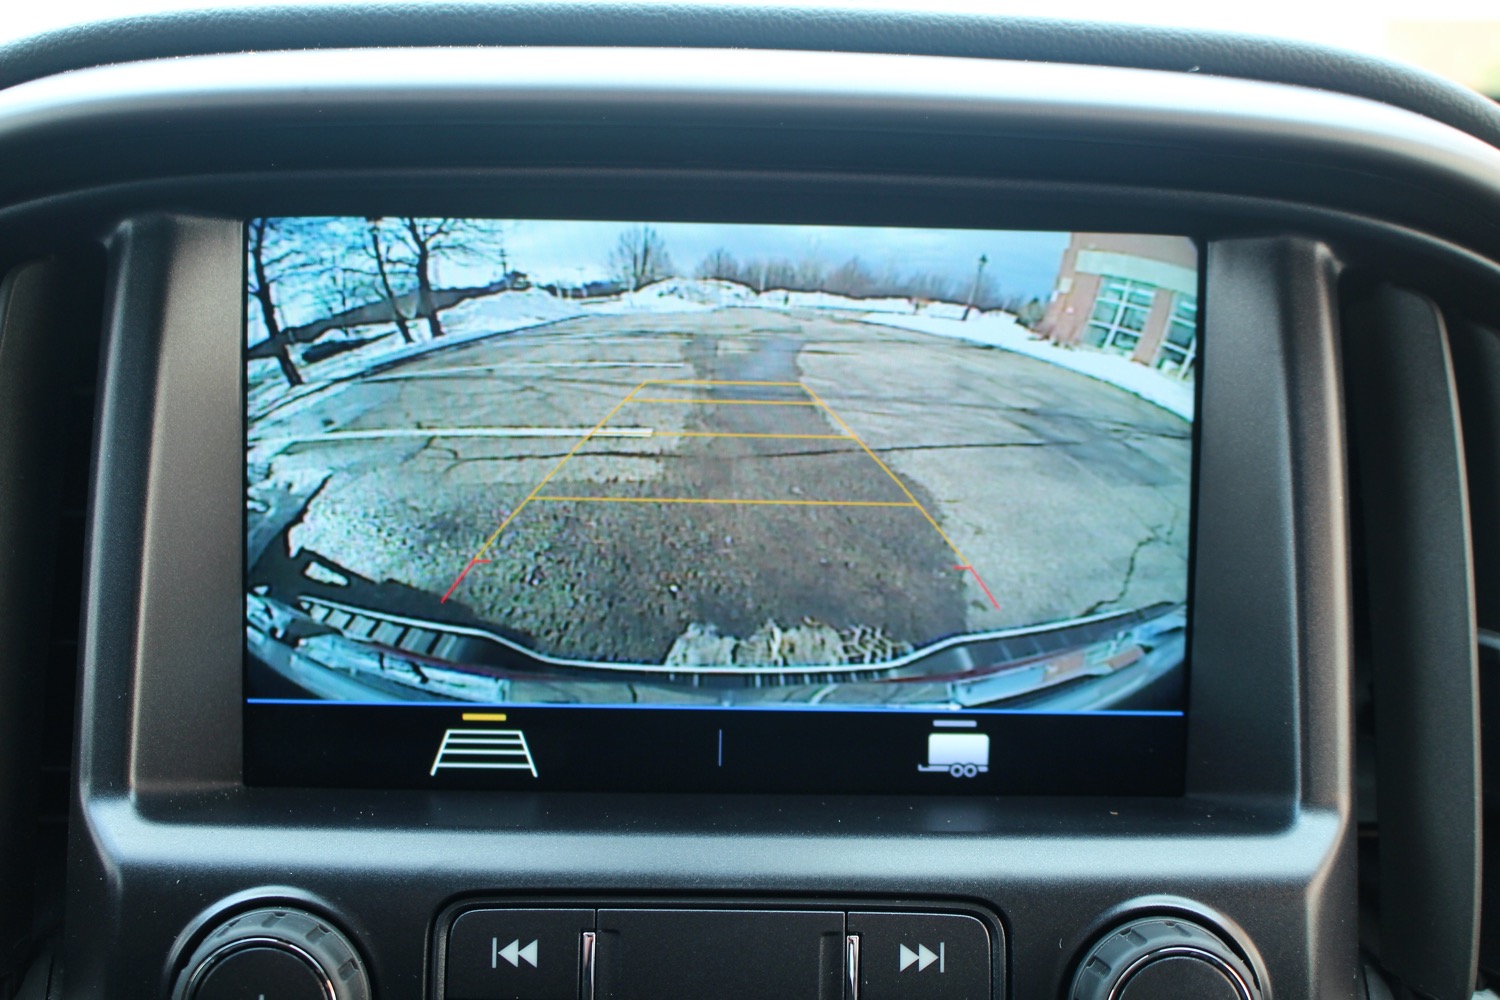 GM Vehicles Need To Offer Dash Cam Mode In Vehicles: Opinion